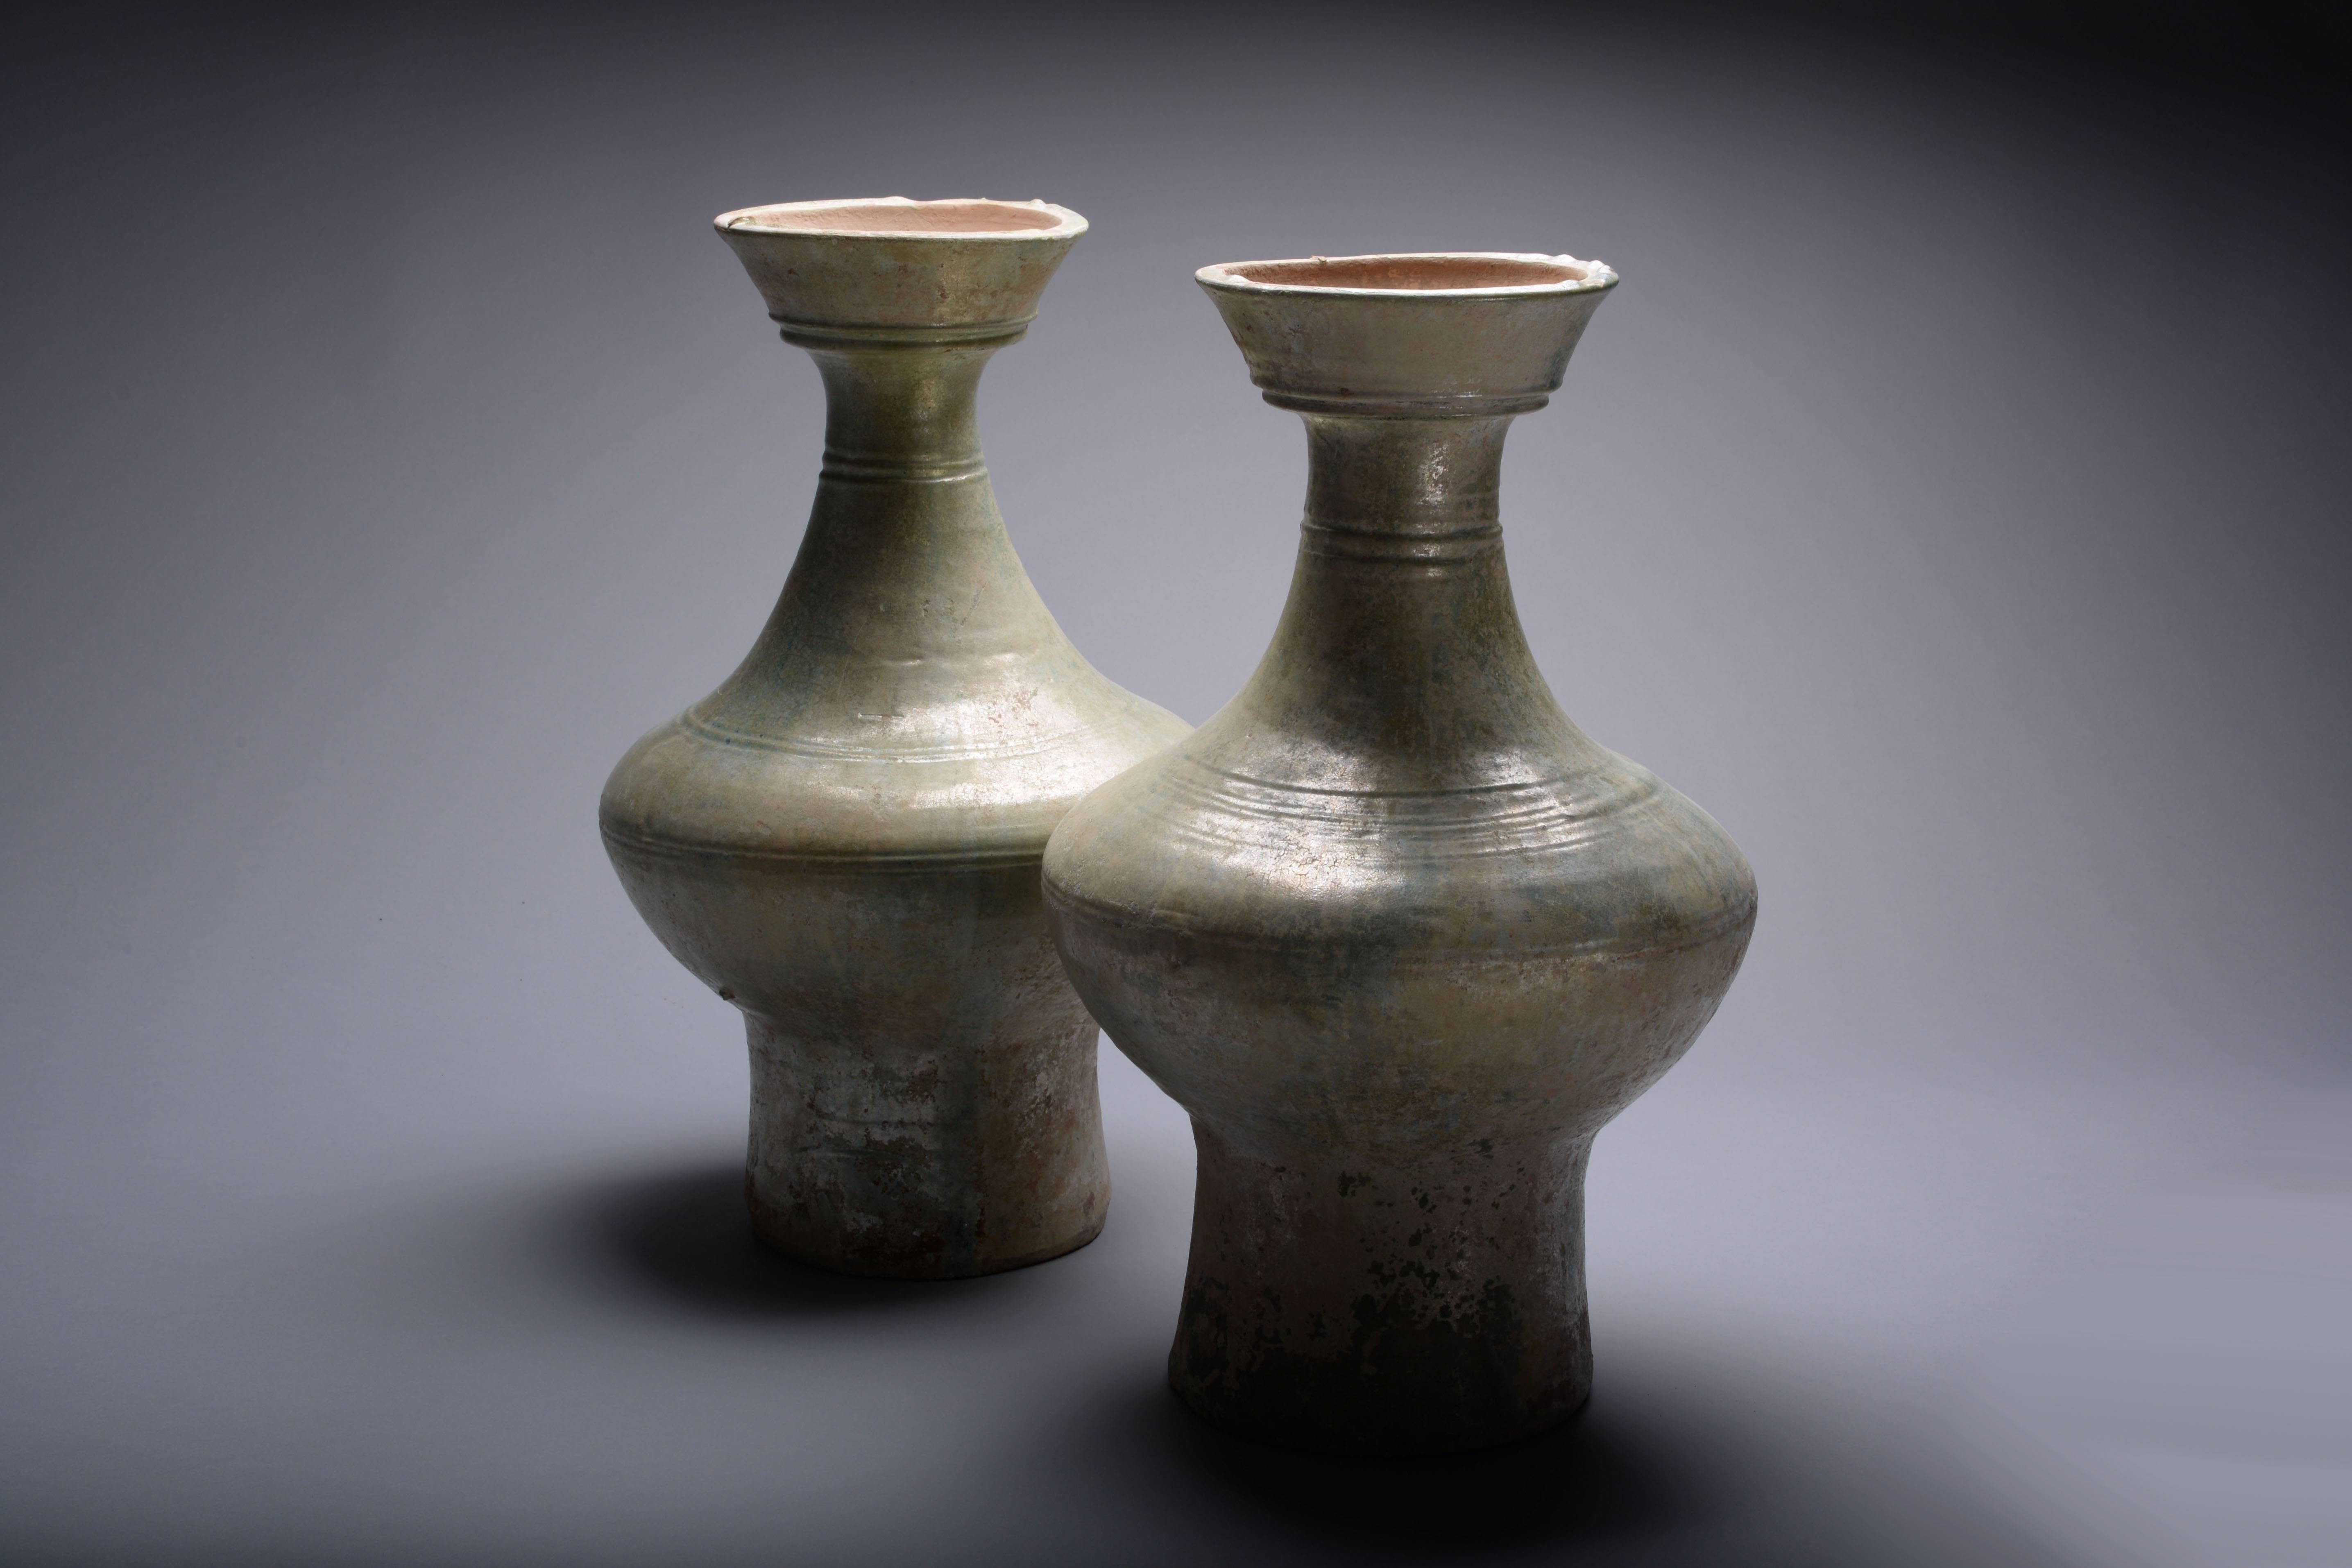 A pair of large ancient Chinese green glazed vases, dating to China's Han dynasty, circa 206 BC-220 AD.

Of undulating, elegant form, the piriform bodies glisten with a silvery green glaze.

These beautiful vases were used as storage vessels for